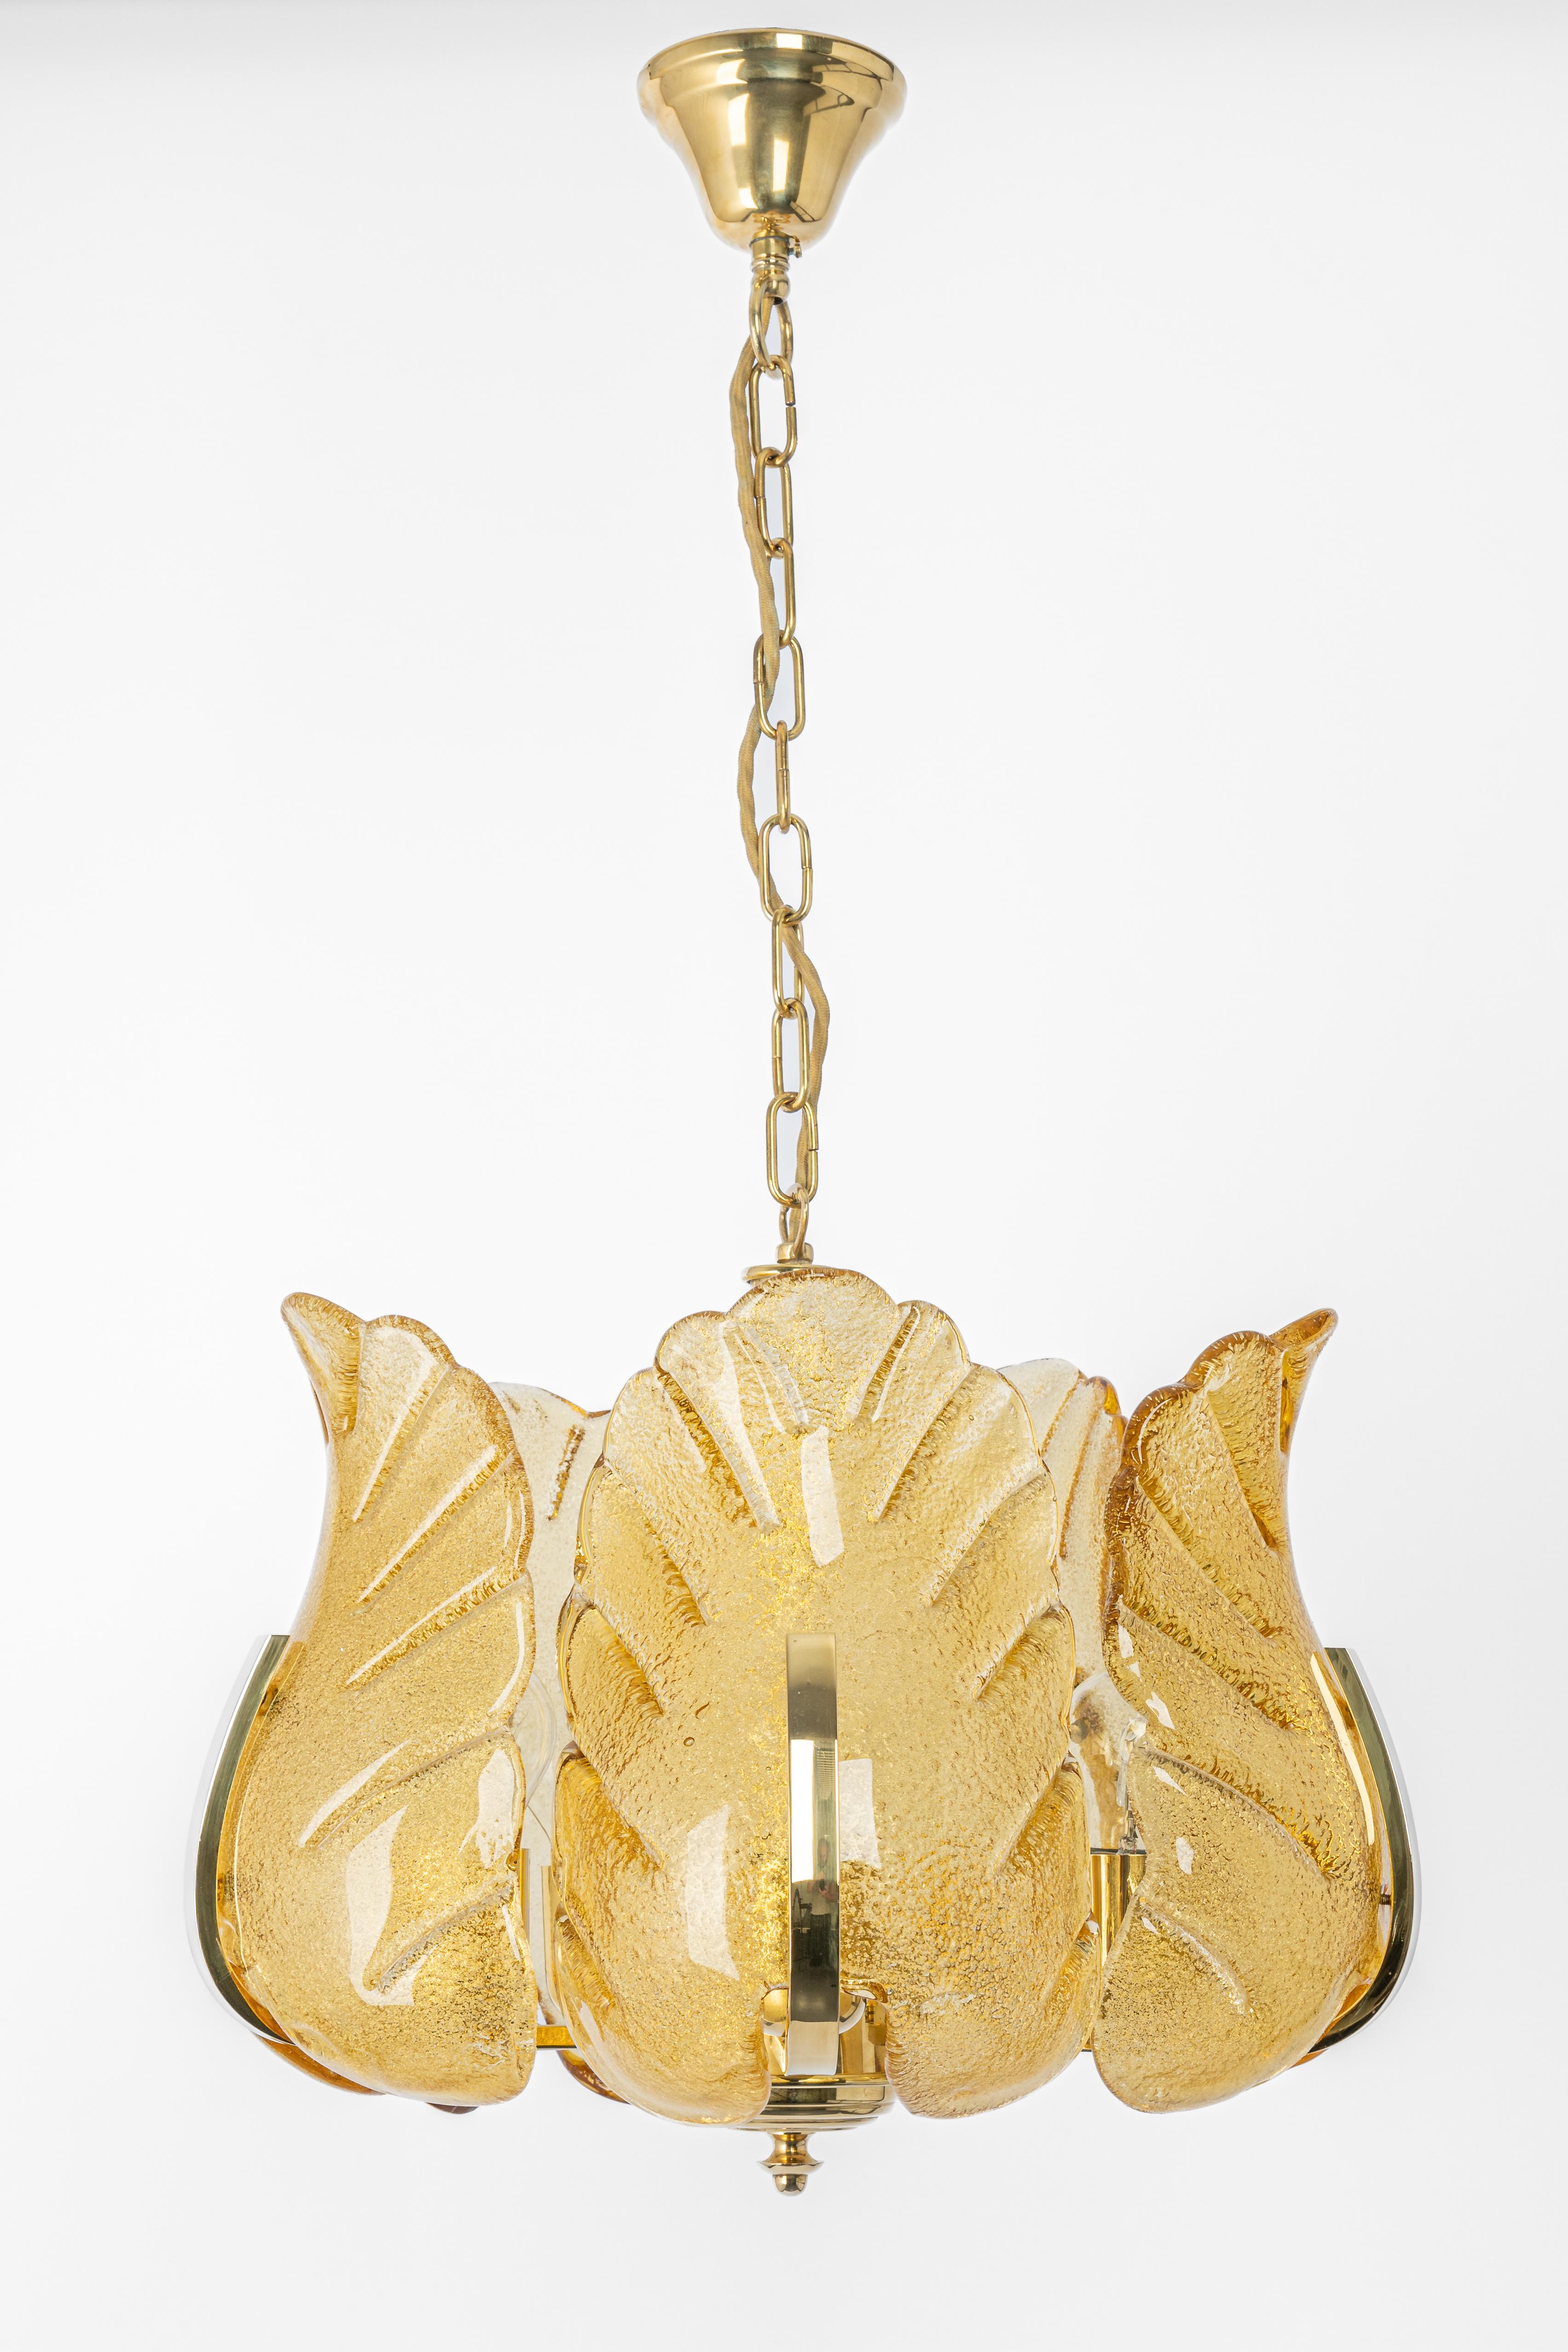 Stunning Carl Fagerlund Chandelier Murano Glass Leaves, 1960s For Sale 7